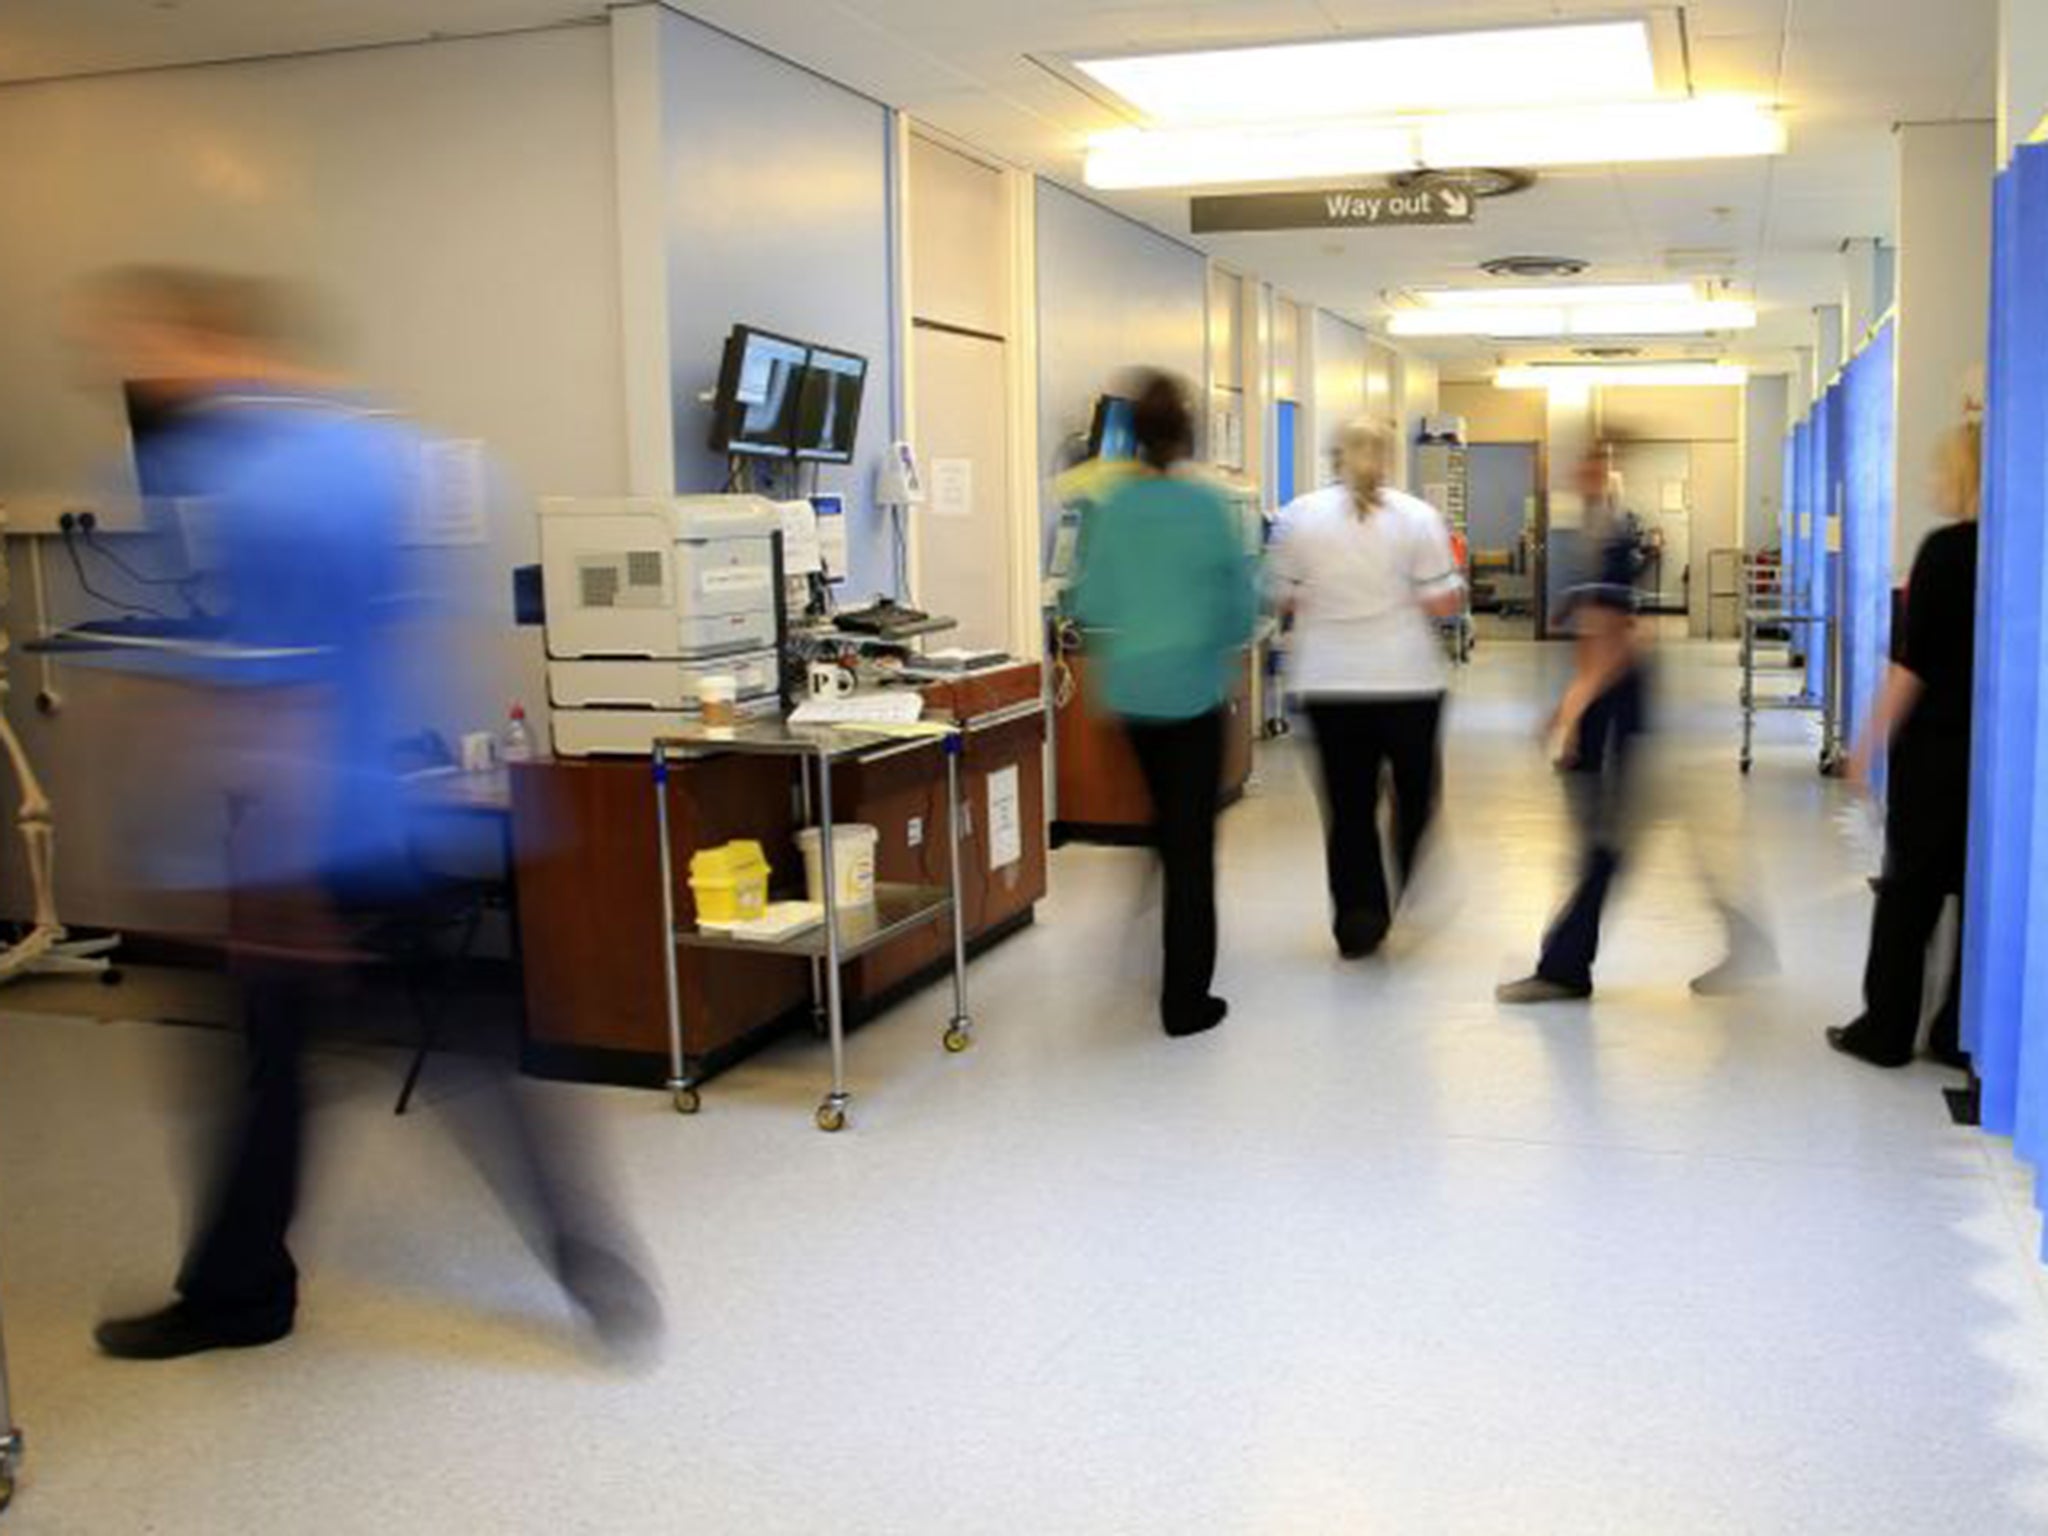 Labour's plans risk embarking on yet another costly NHS re-organisation